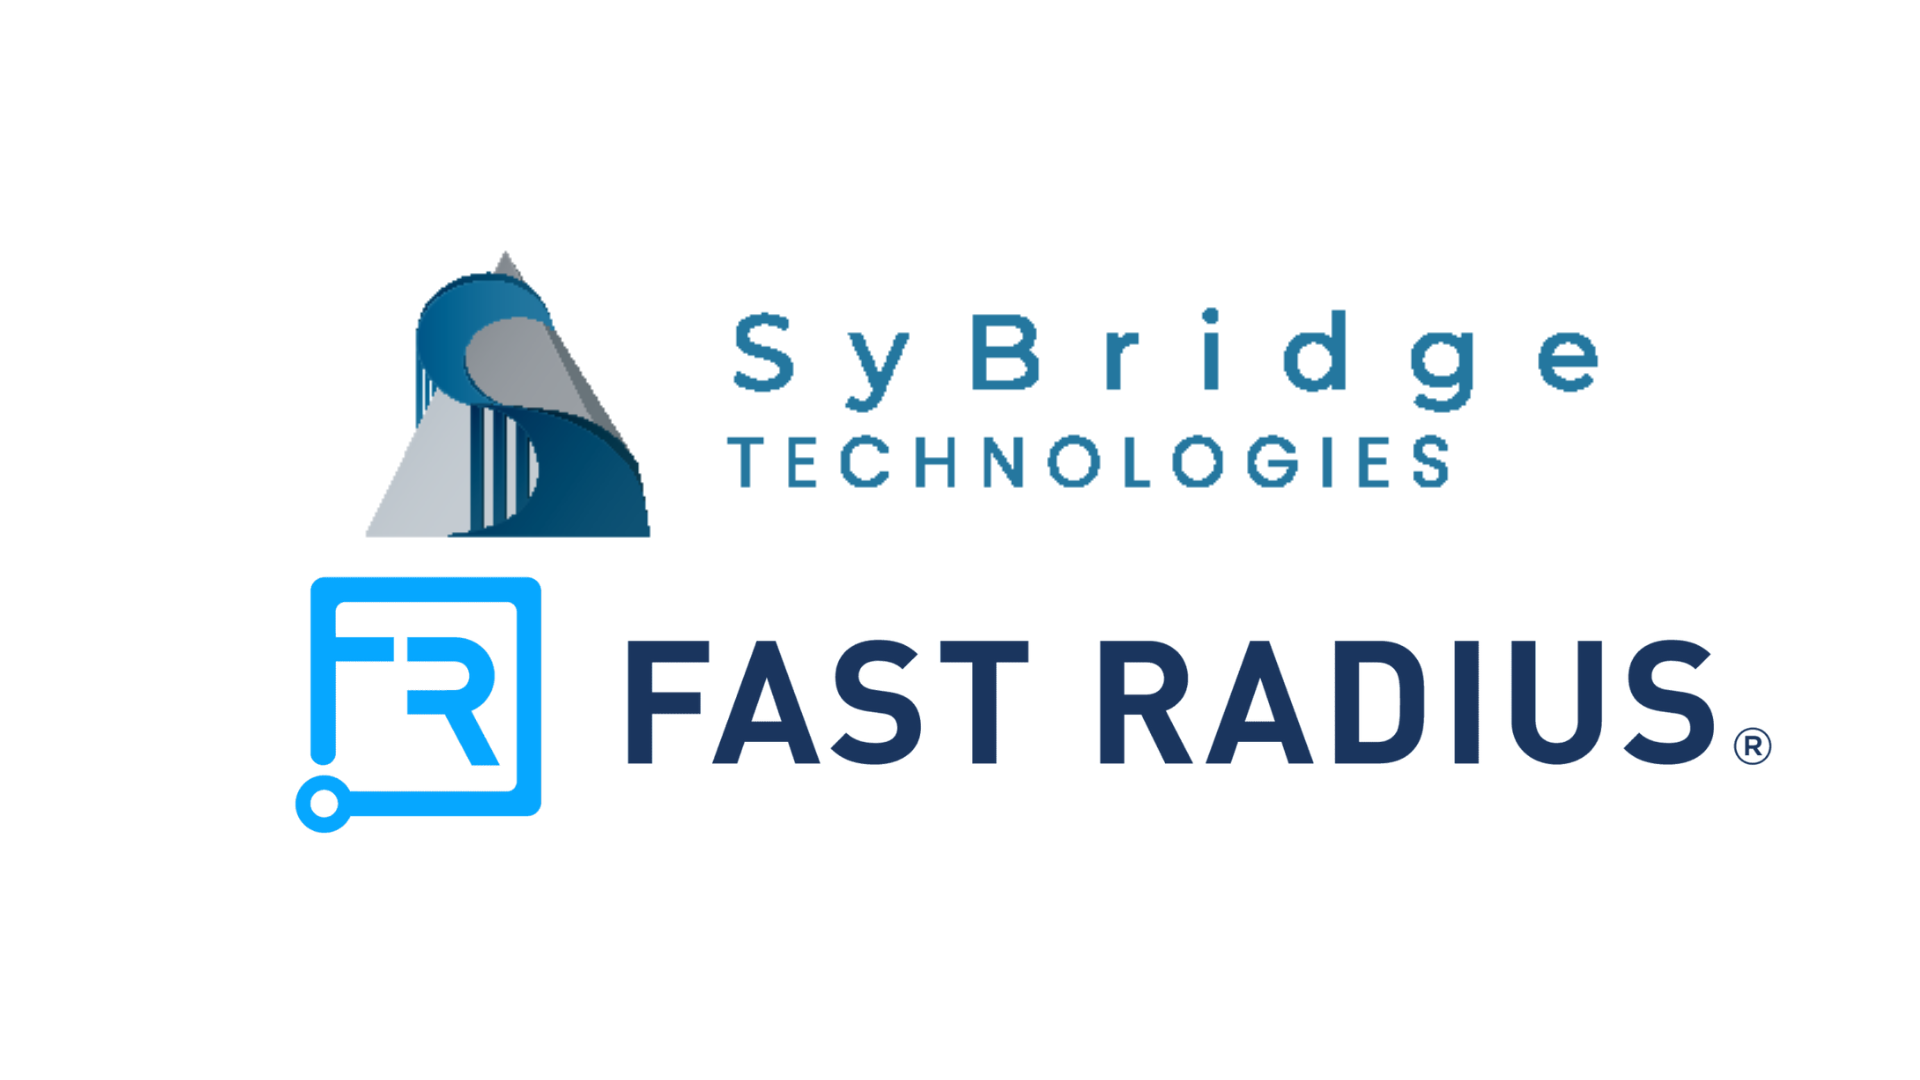 SyBridge Digital Solutions will acquire certain assets of Fast Radius, subject to court approval, expected to close by the end of 2022.